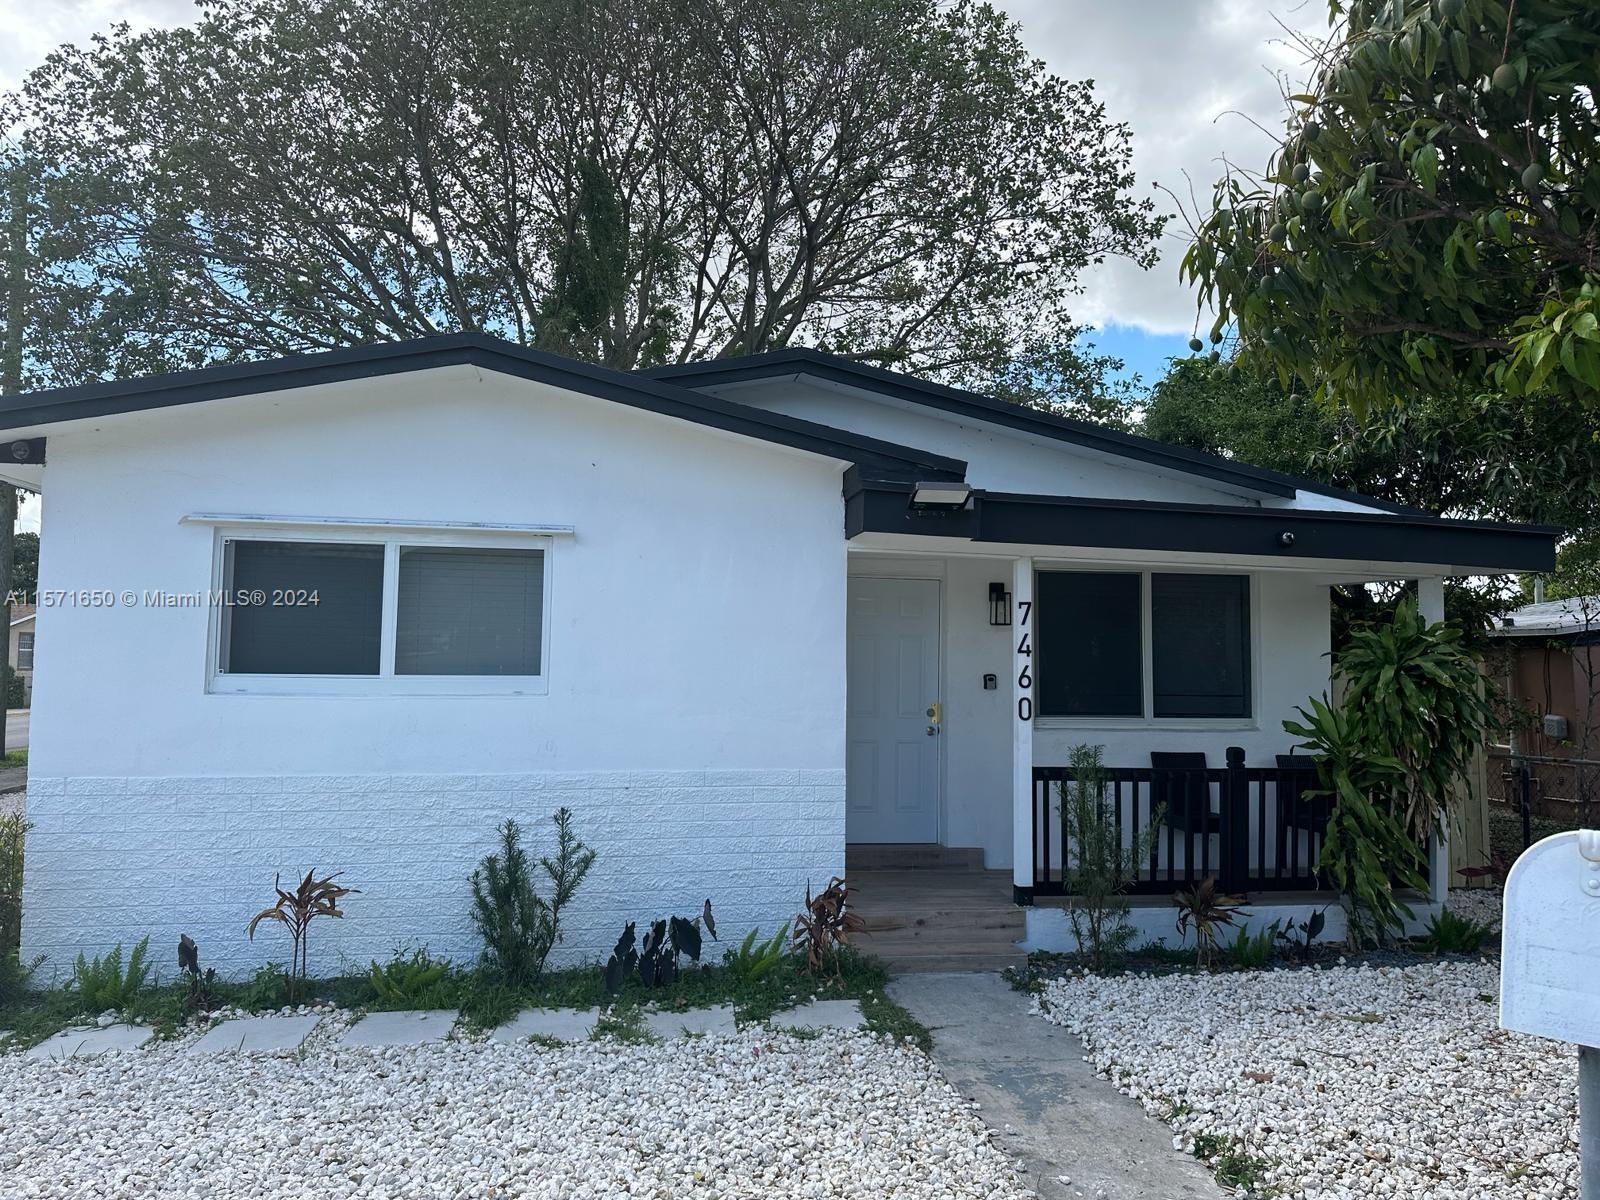 Photo of 7460 NW 17th Ave in Miami, FL